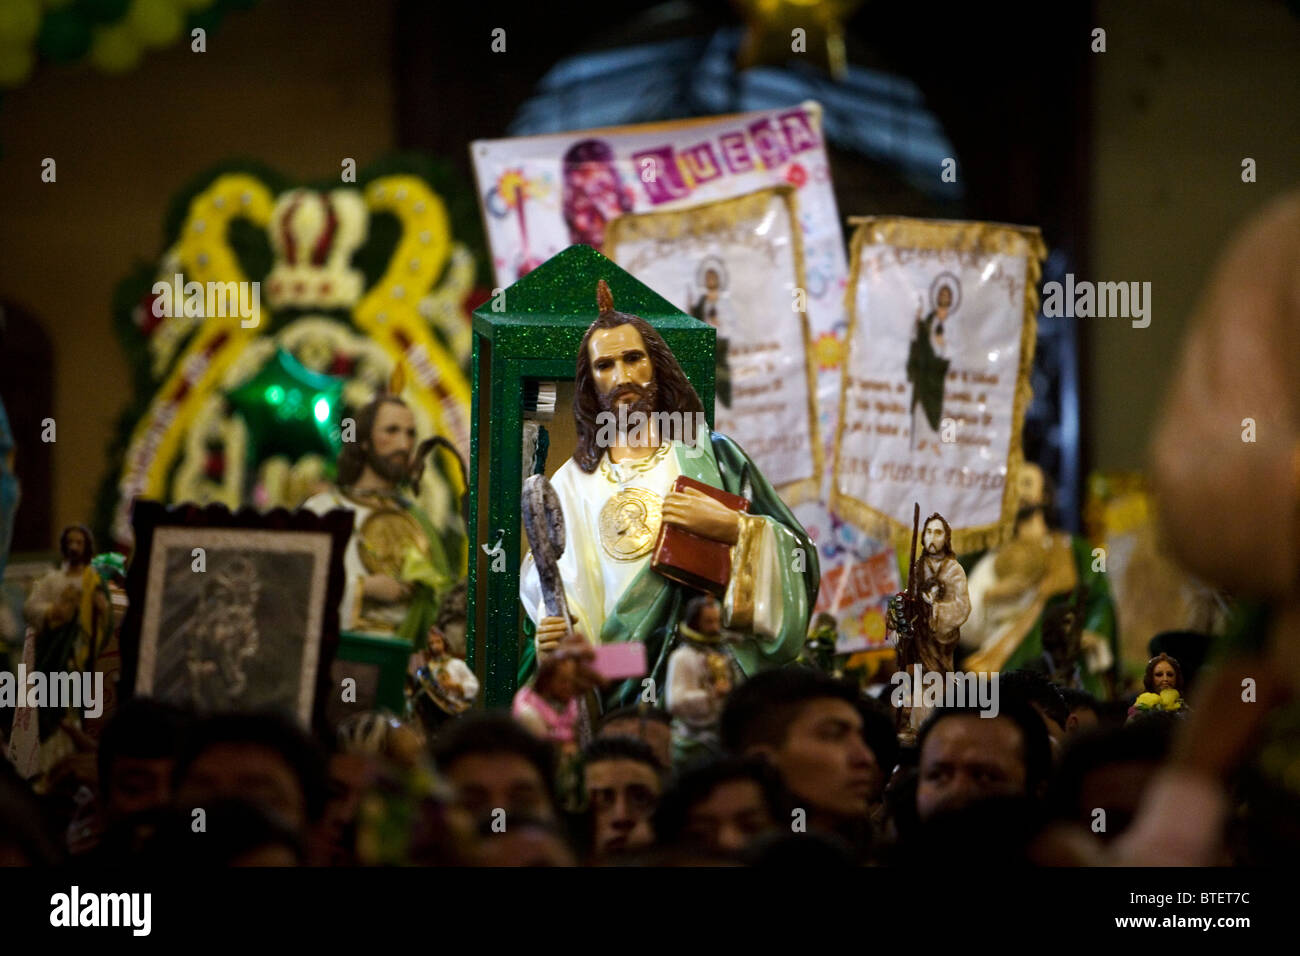 Mexicans hold sculptures and images of Saint Jude Thaddeus during a mass in Mexico City Stock Photo